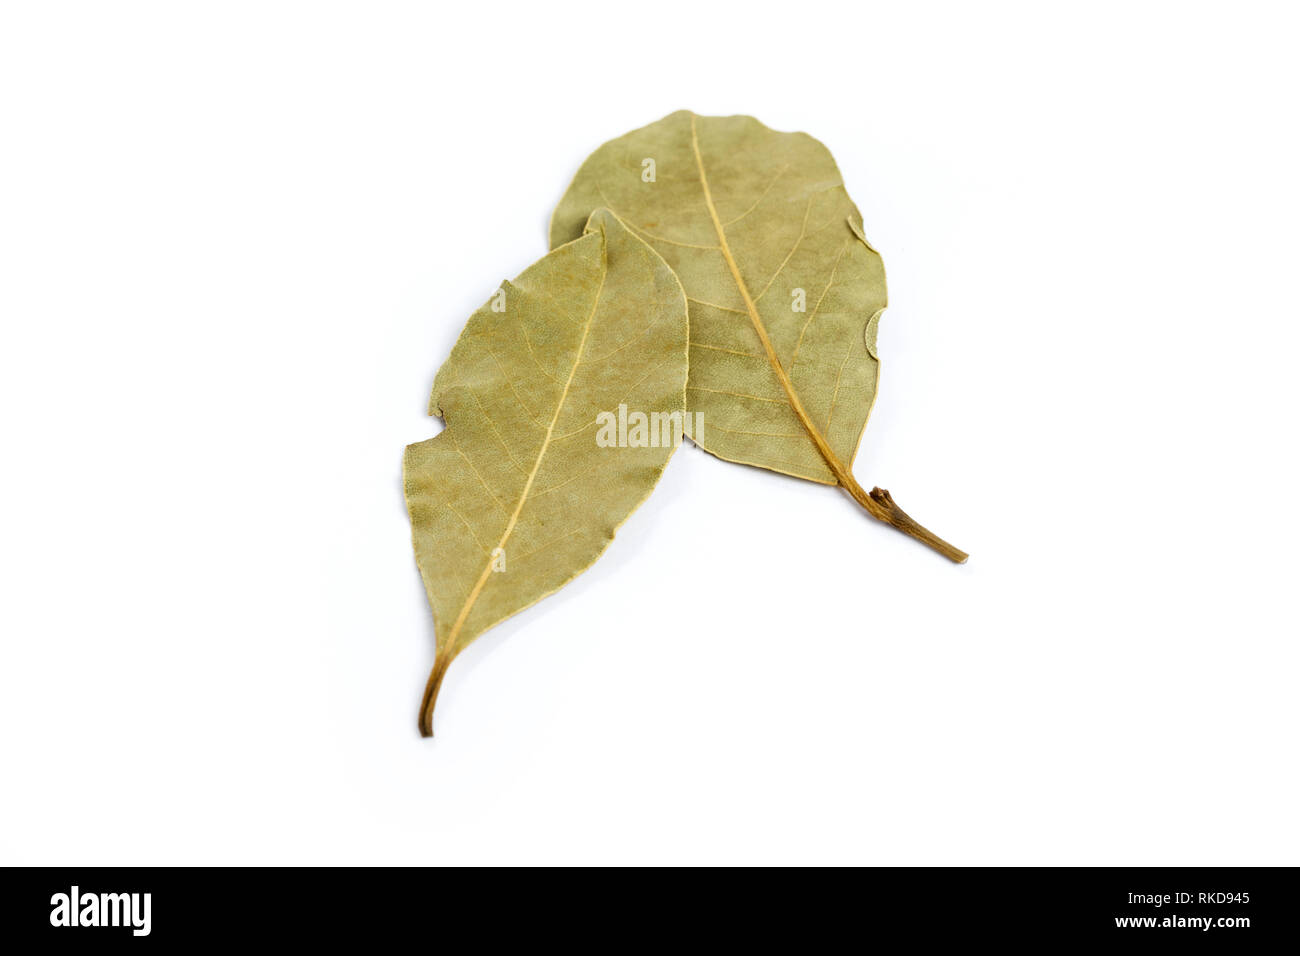 dried bay leaves isolated on a white background. Stock Photo